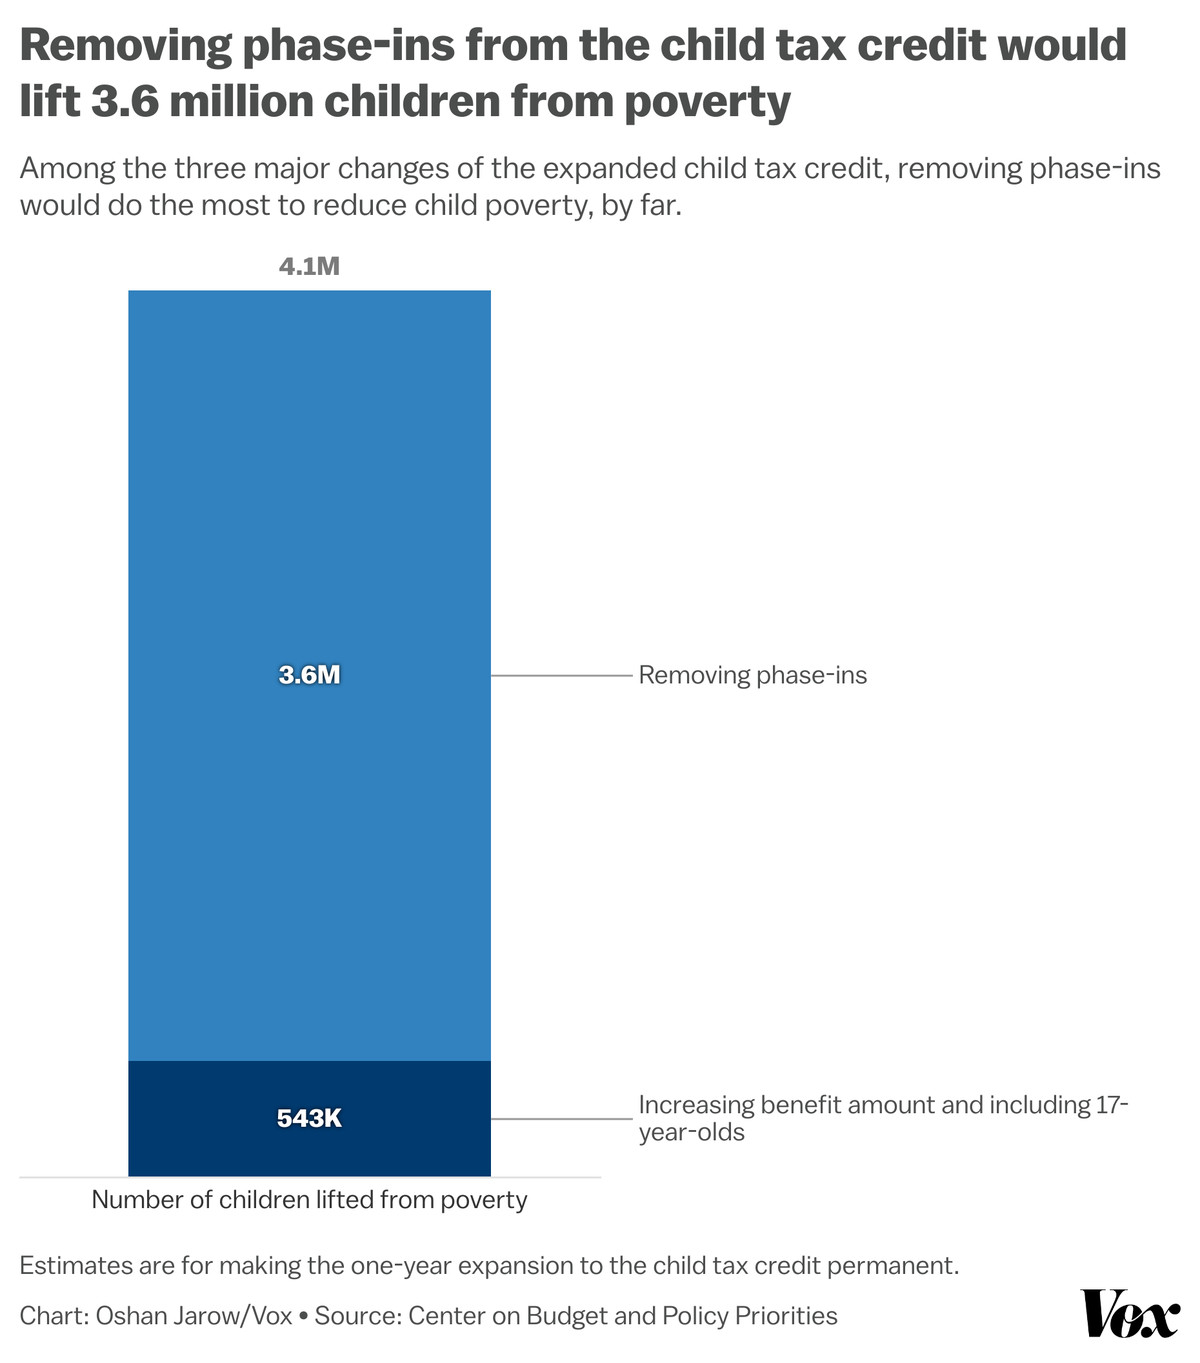 Bar chart that visually represents the 3.6 million children that would be lifted from poverty if phase-ins were removed, compared to only 543,000 children if phase-ins remained but benefit amounts were increased and 17-year-olds were included. 